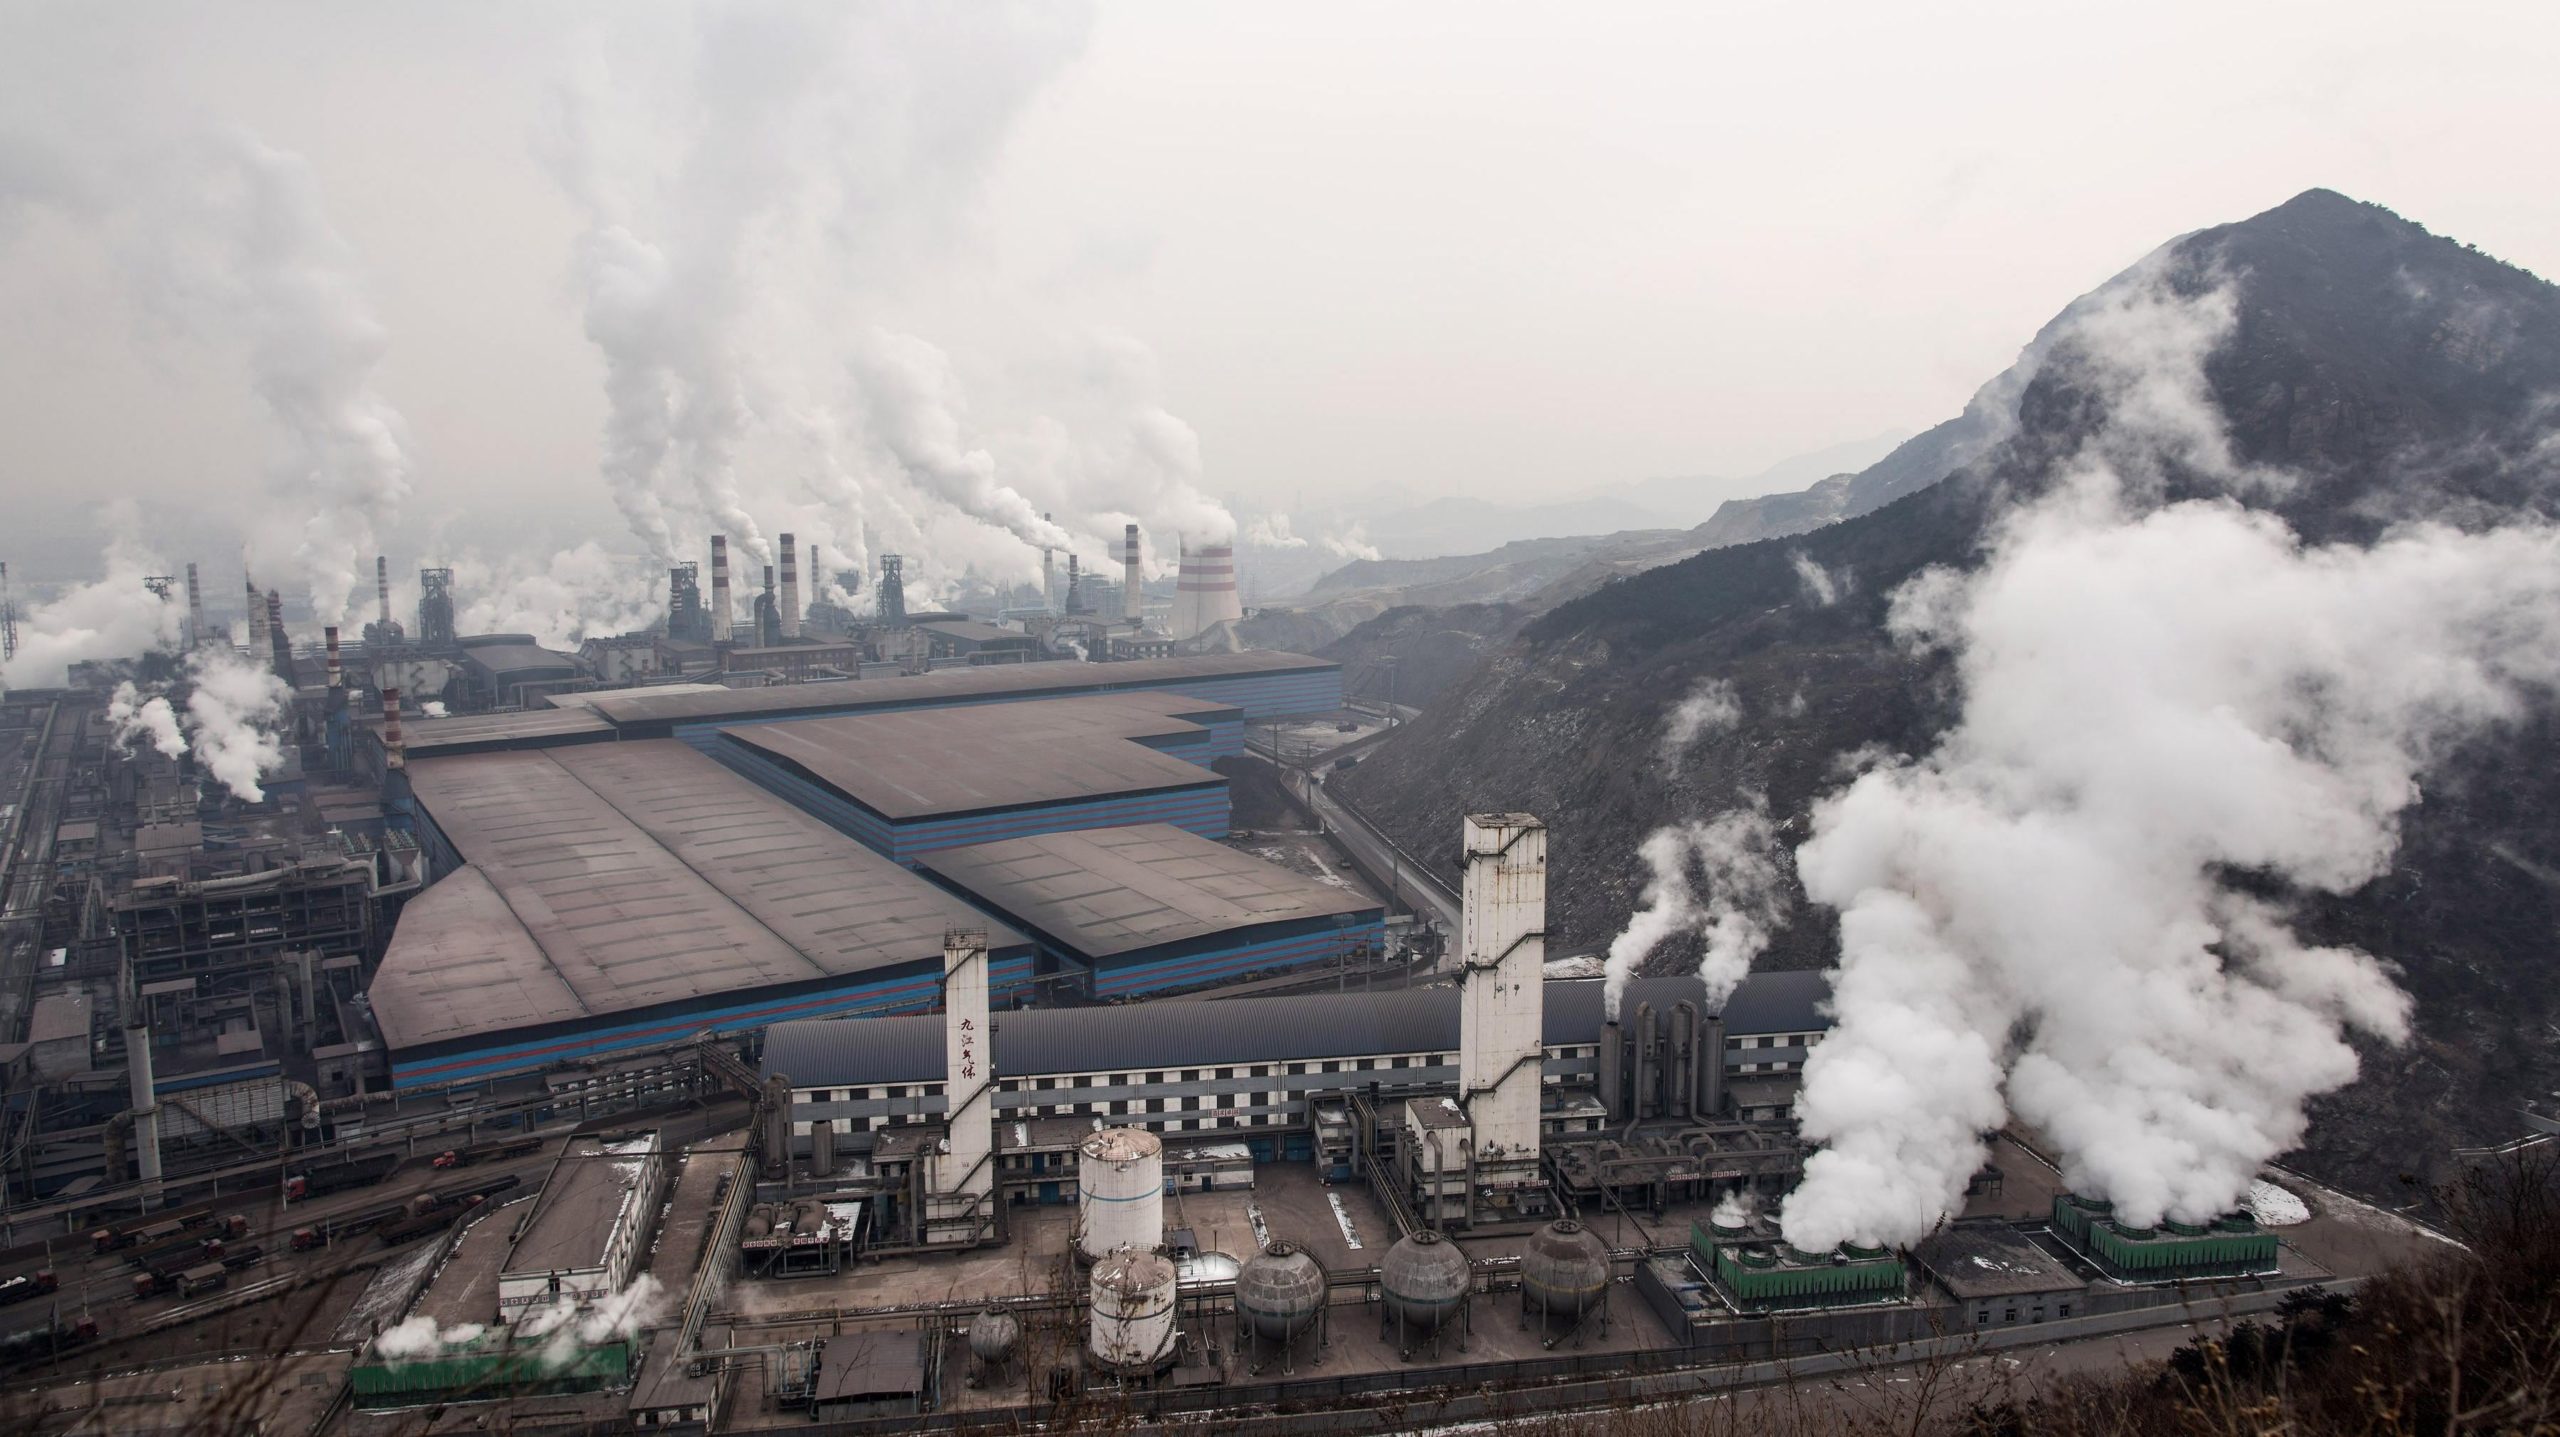 A general view of Qian'an steelworks of Shougang Corporation in China. (Photo: Xiaolu Chu, Getty Images)